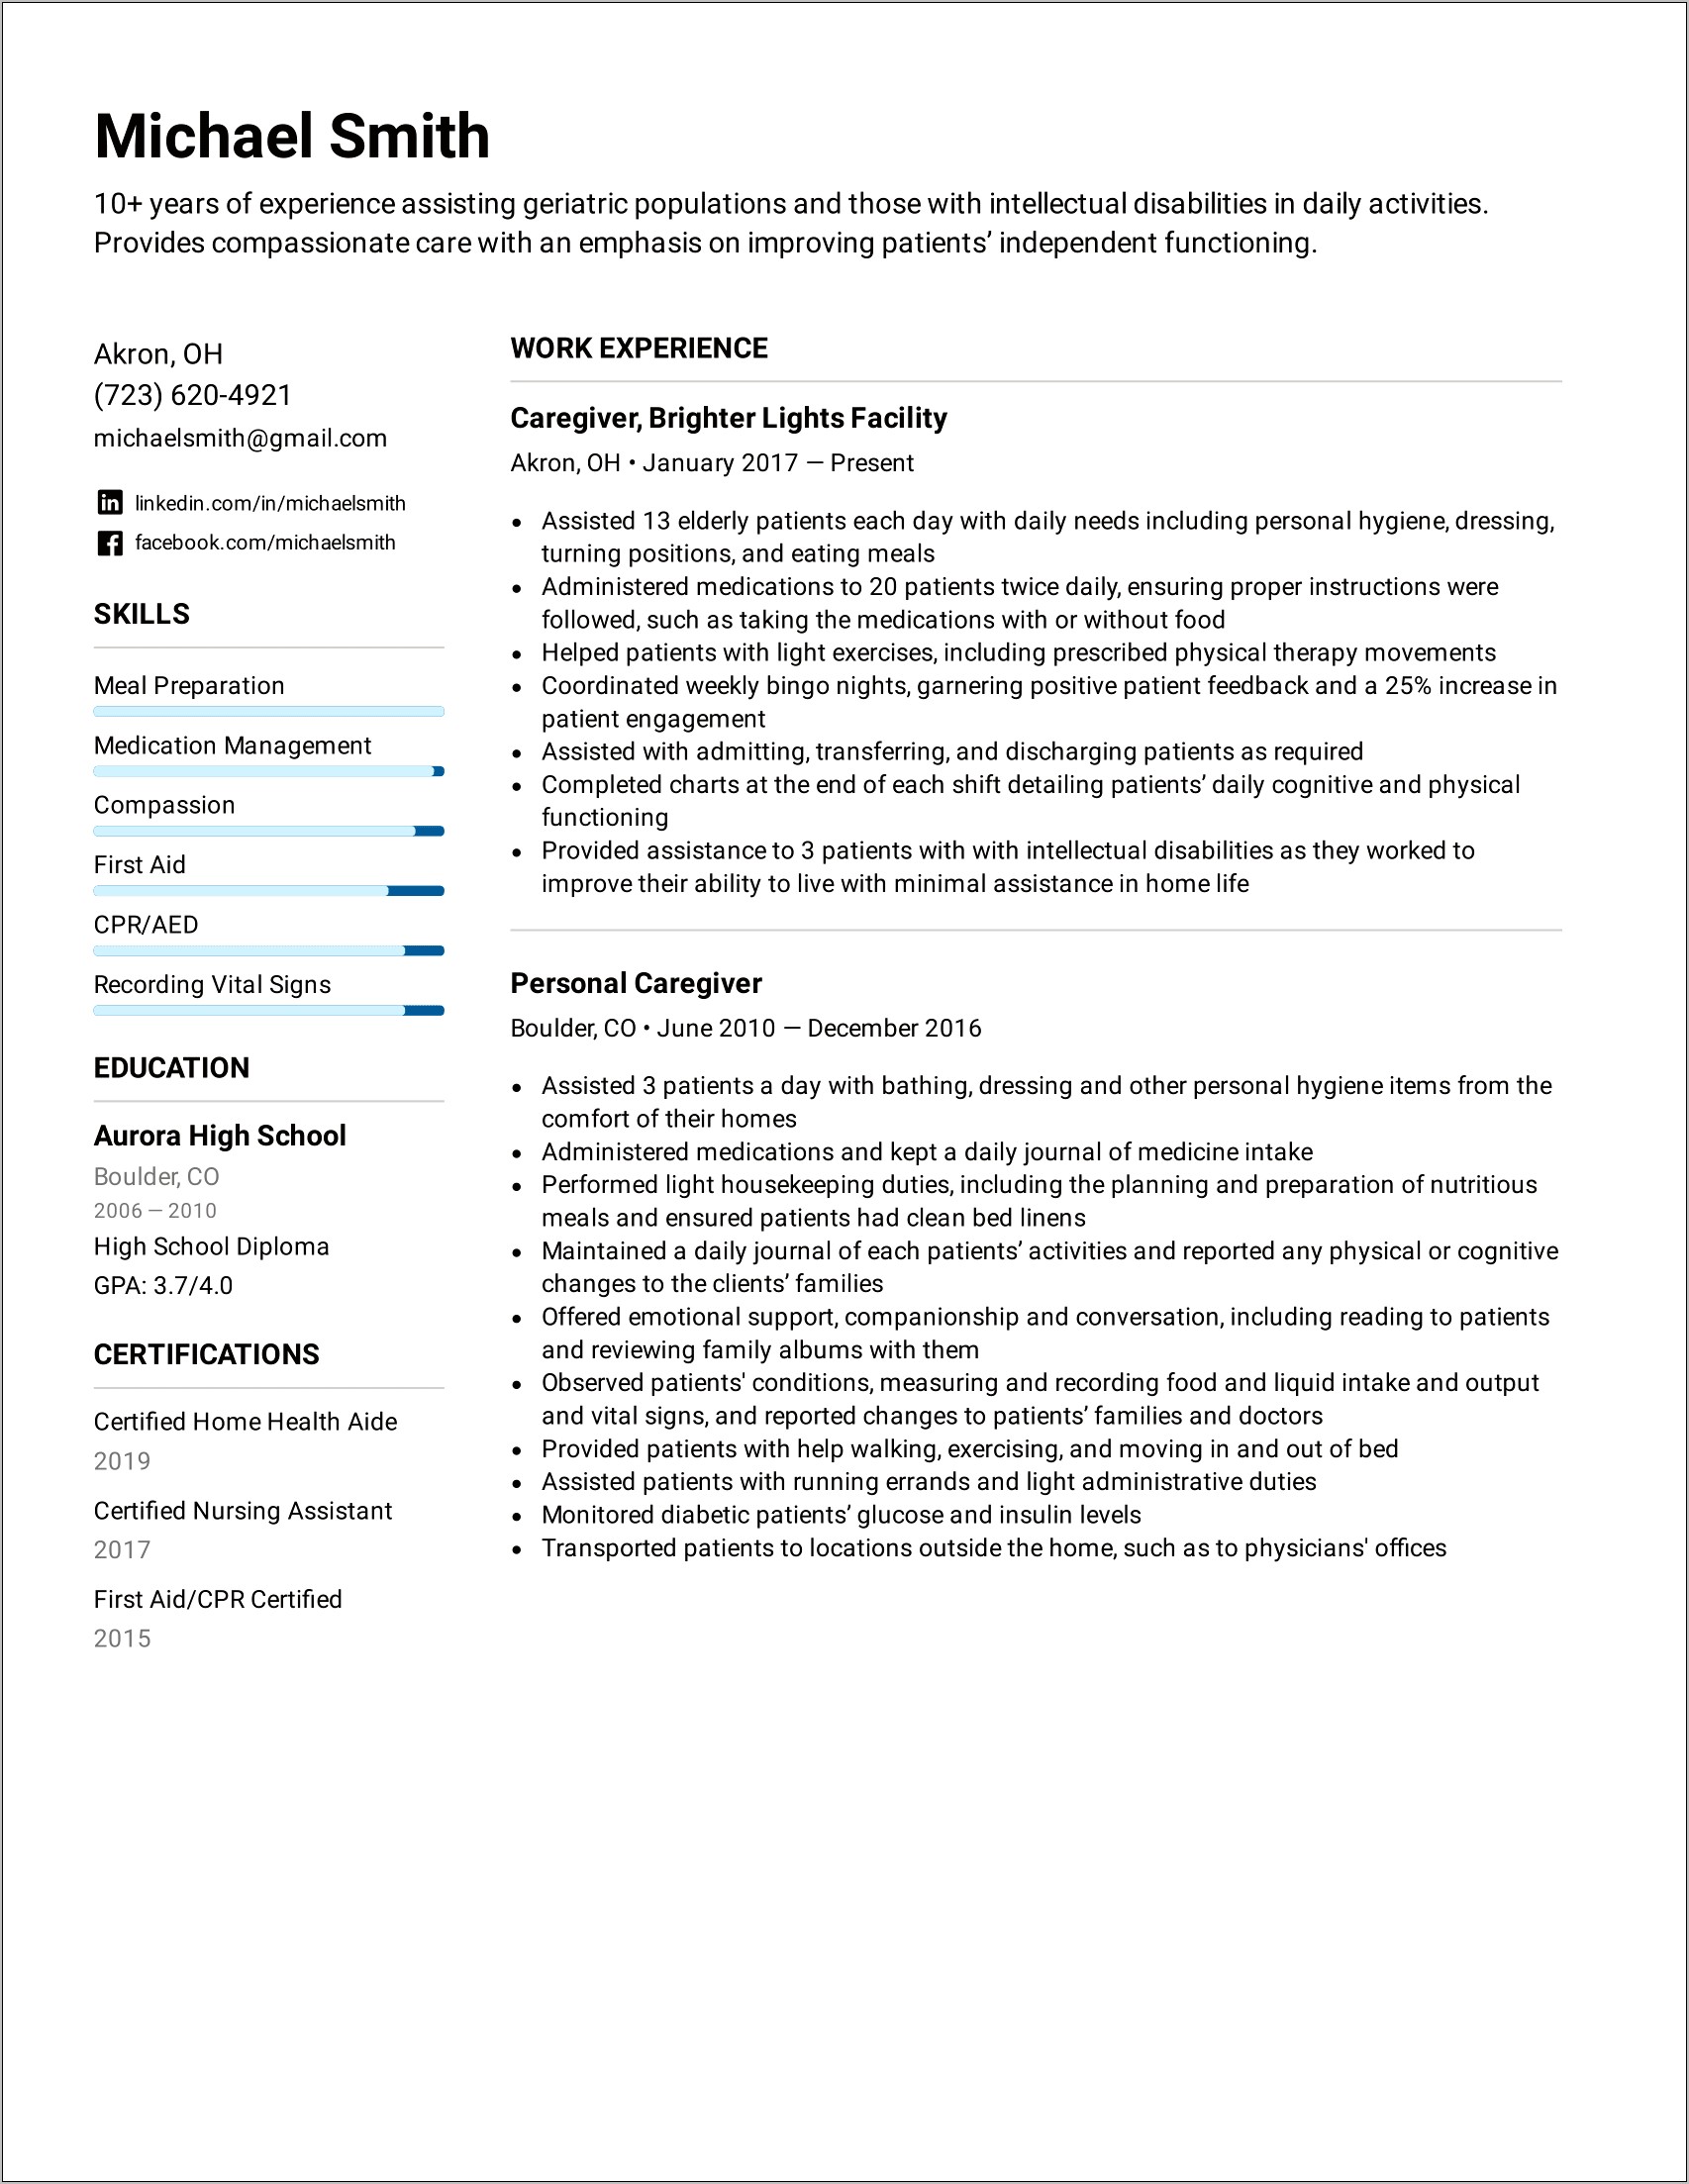 Samples Of Home Health Aide Resumes